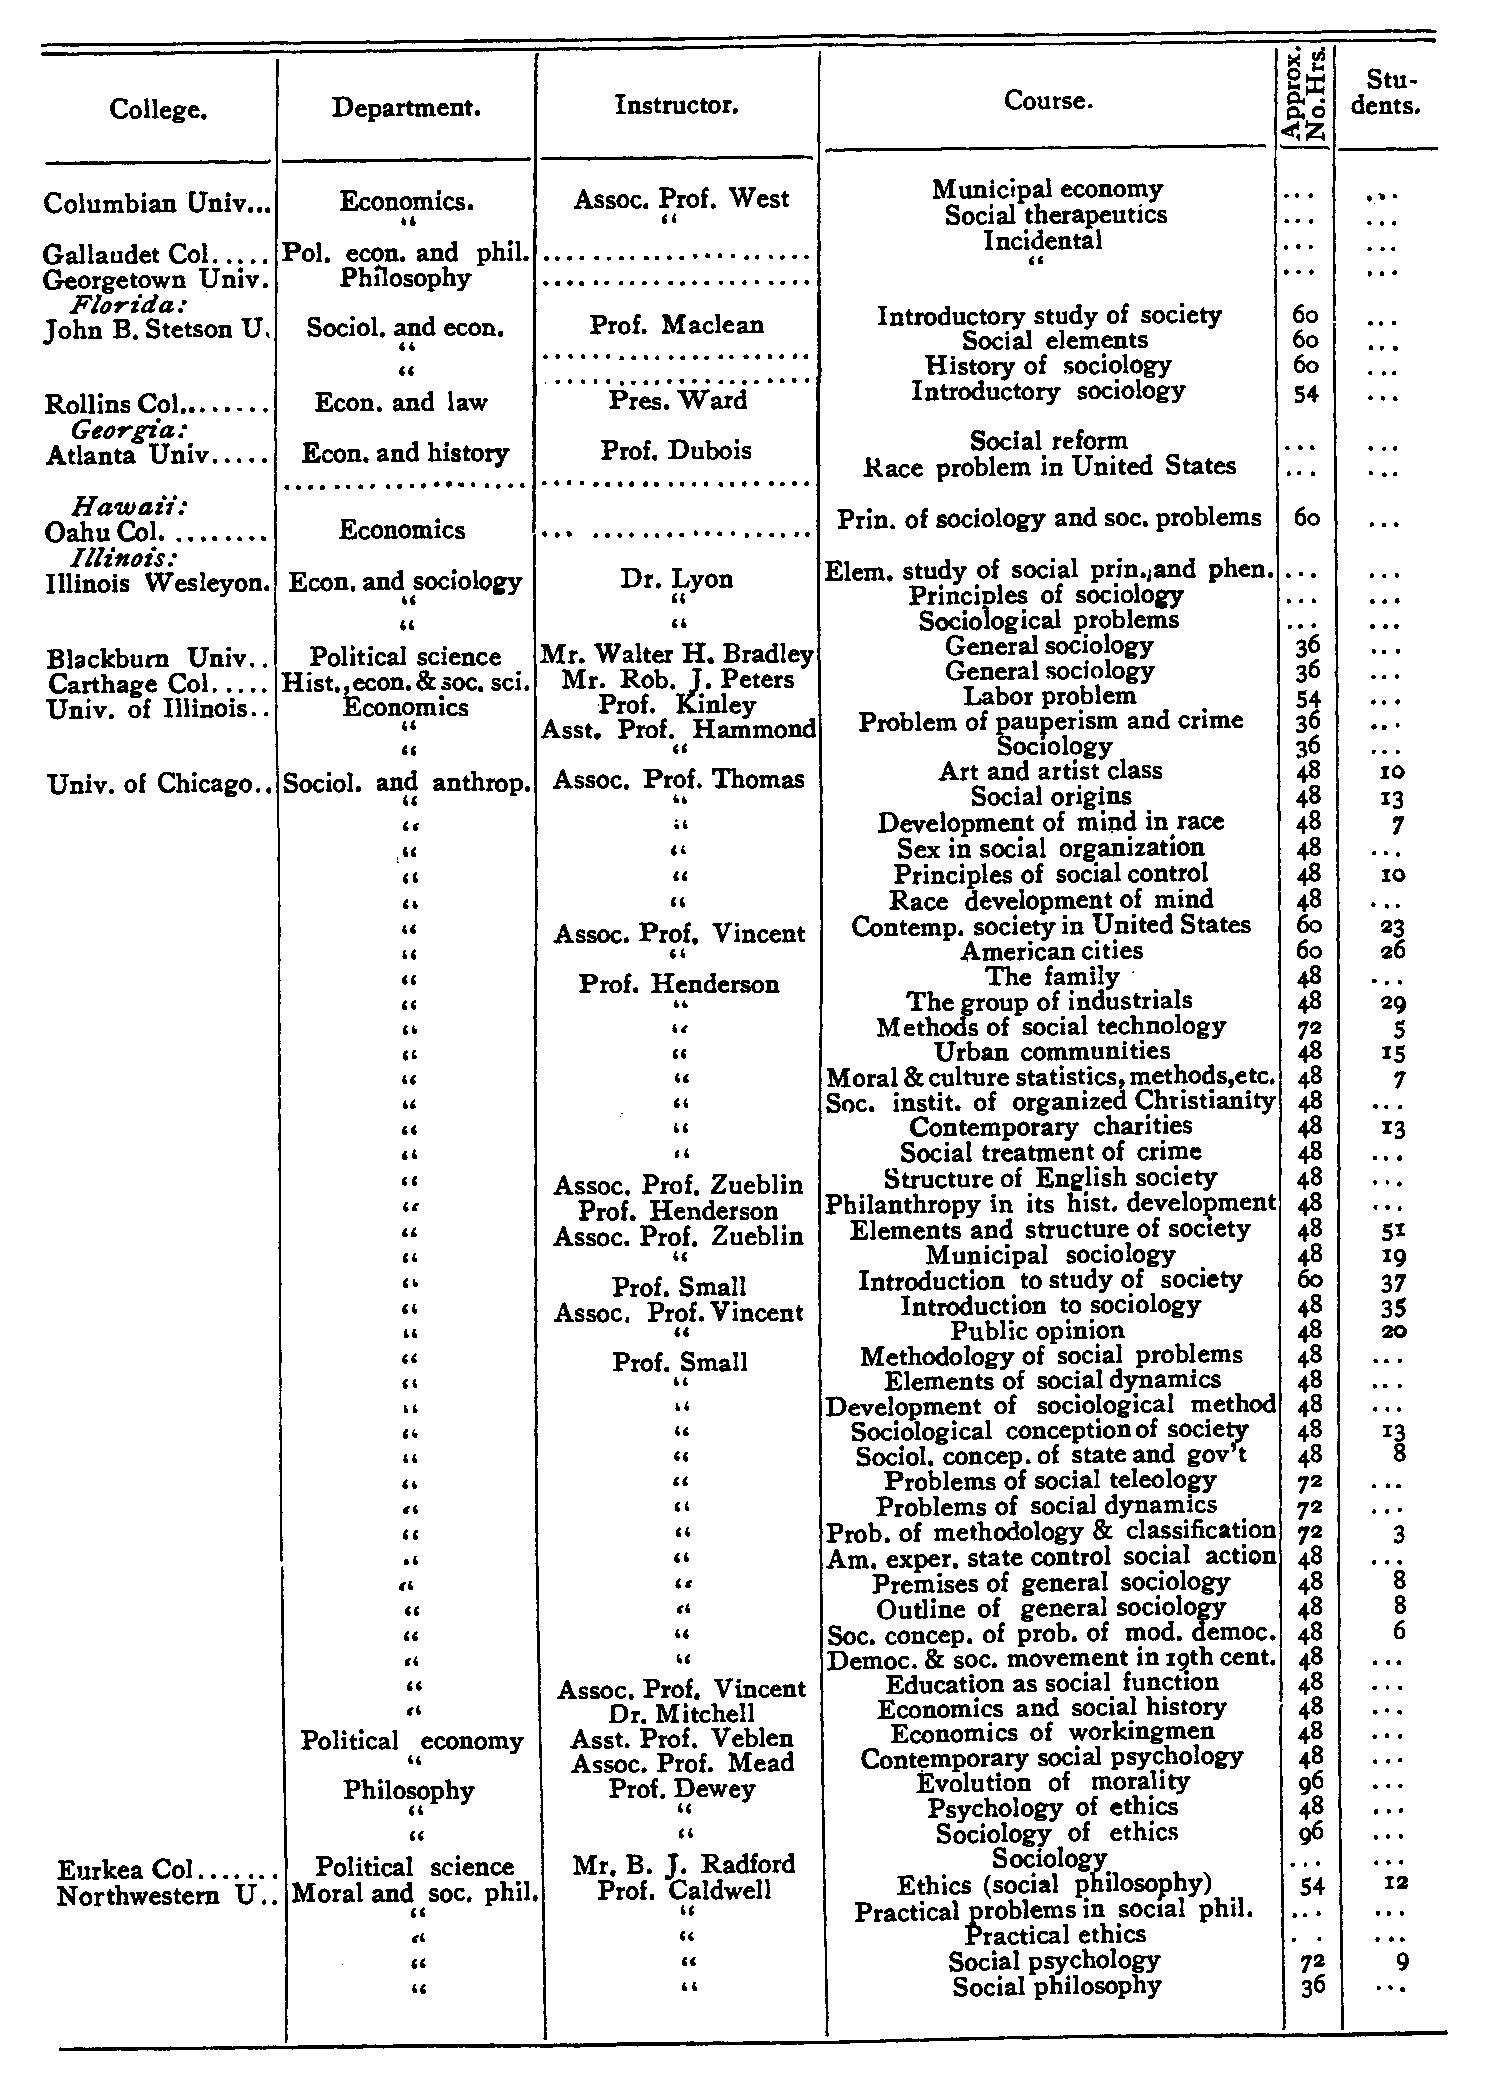 Schedule of Courses in Sociology in 1907, part 2